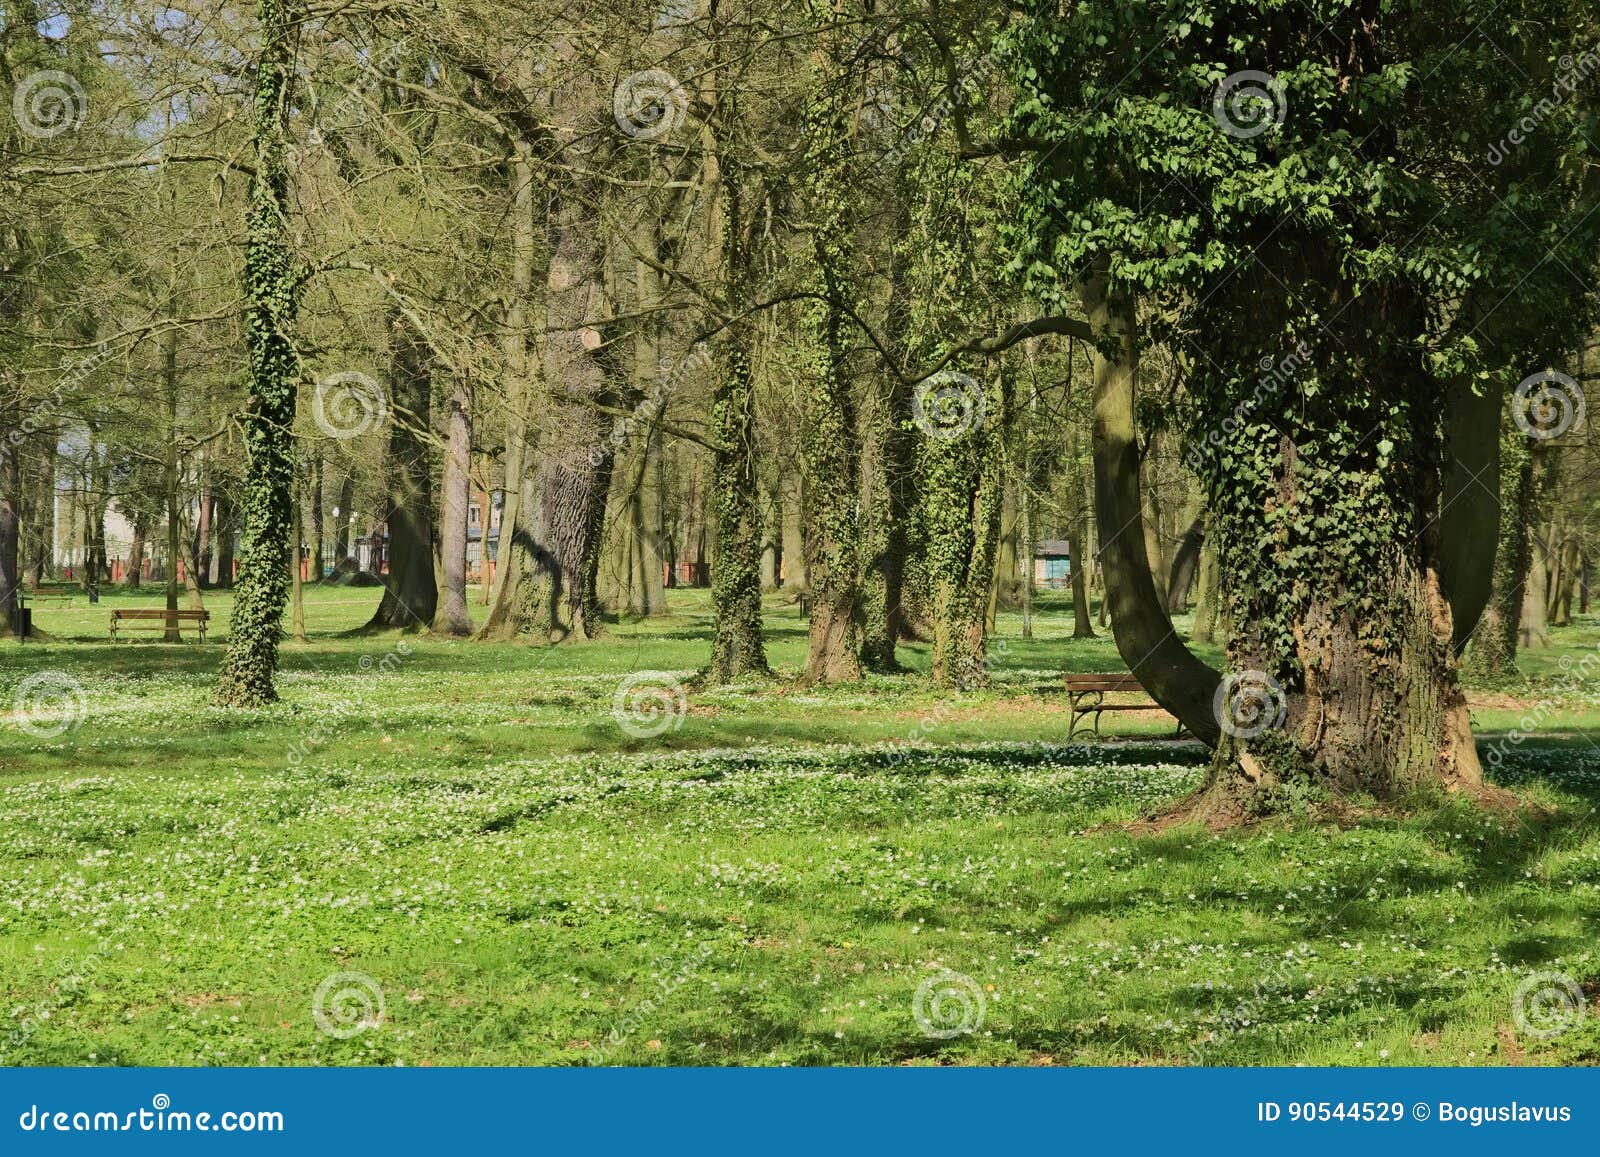 Spring in the park. stock image. Image of carpet, covered - 90544529